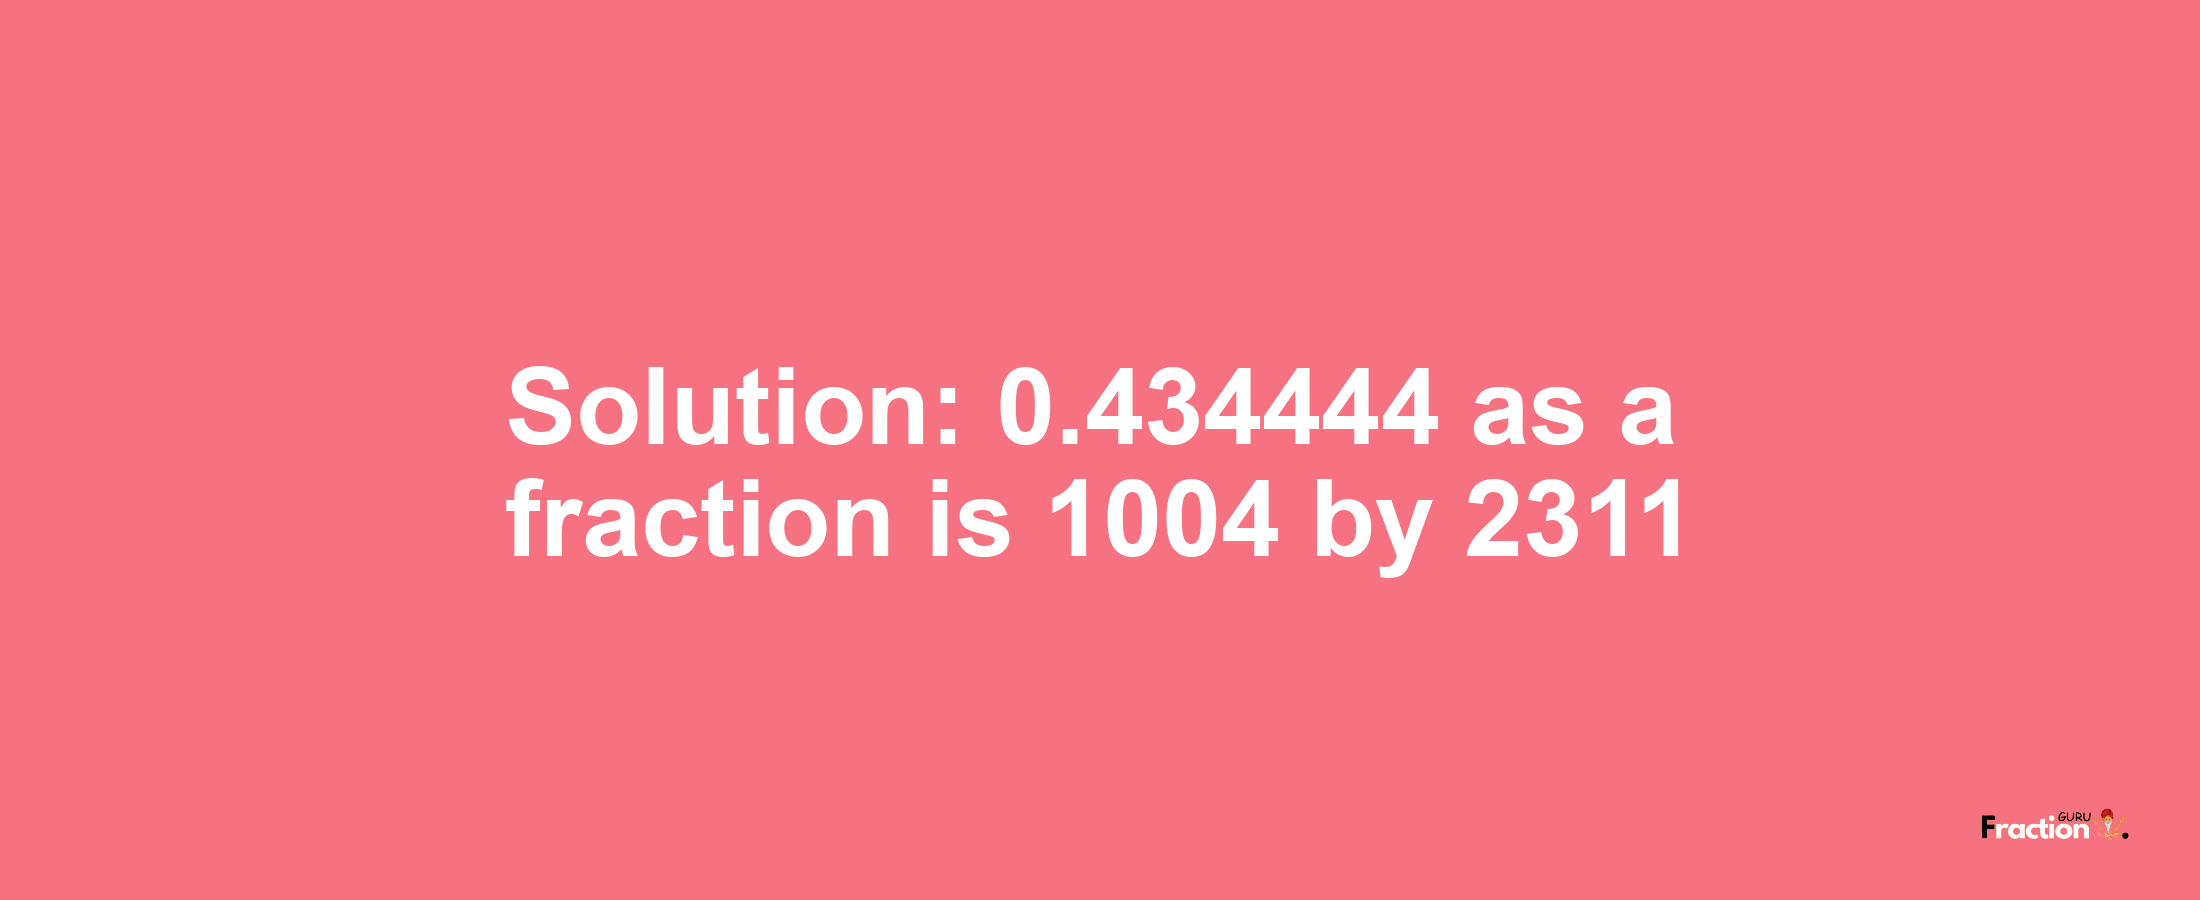 Solution:0.434444 as a fraction is 1004/2311